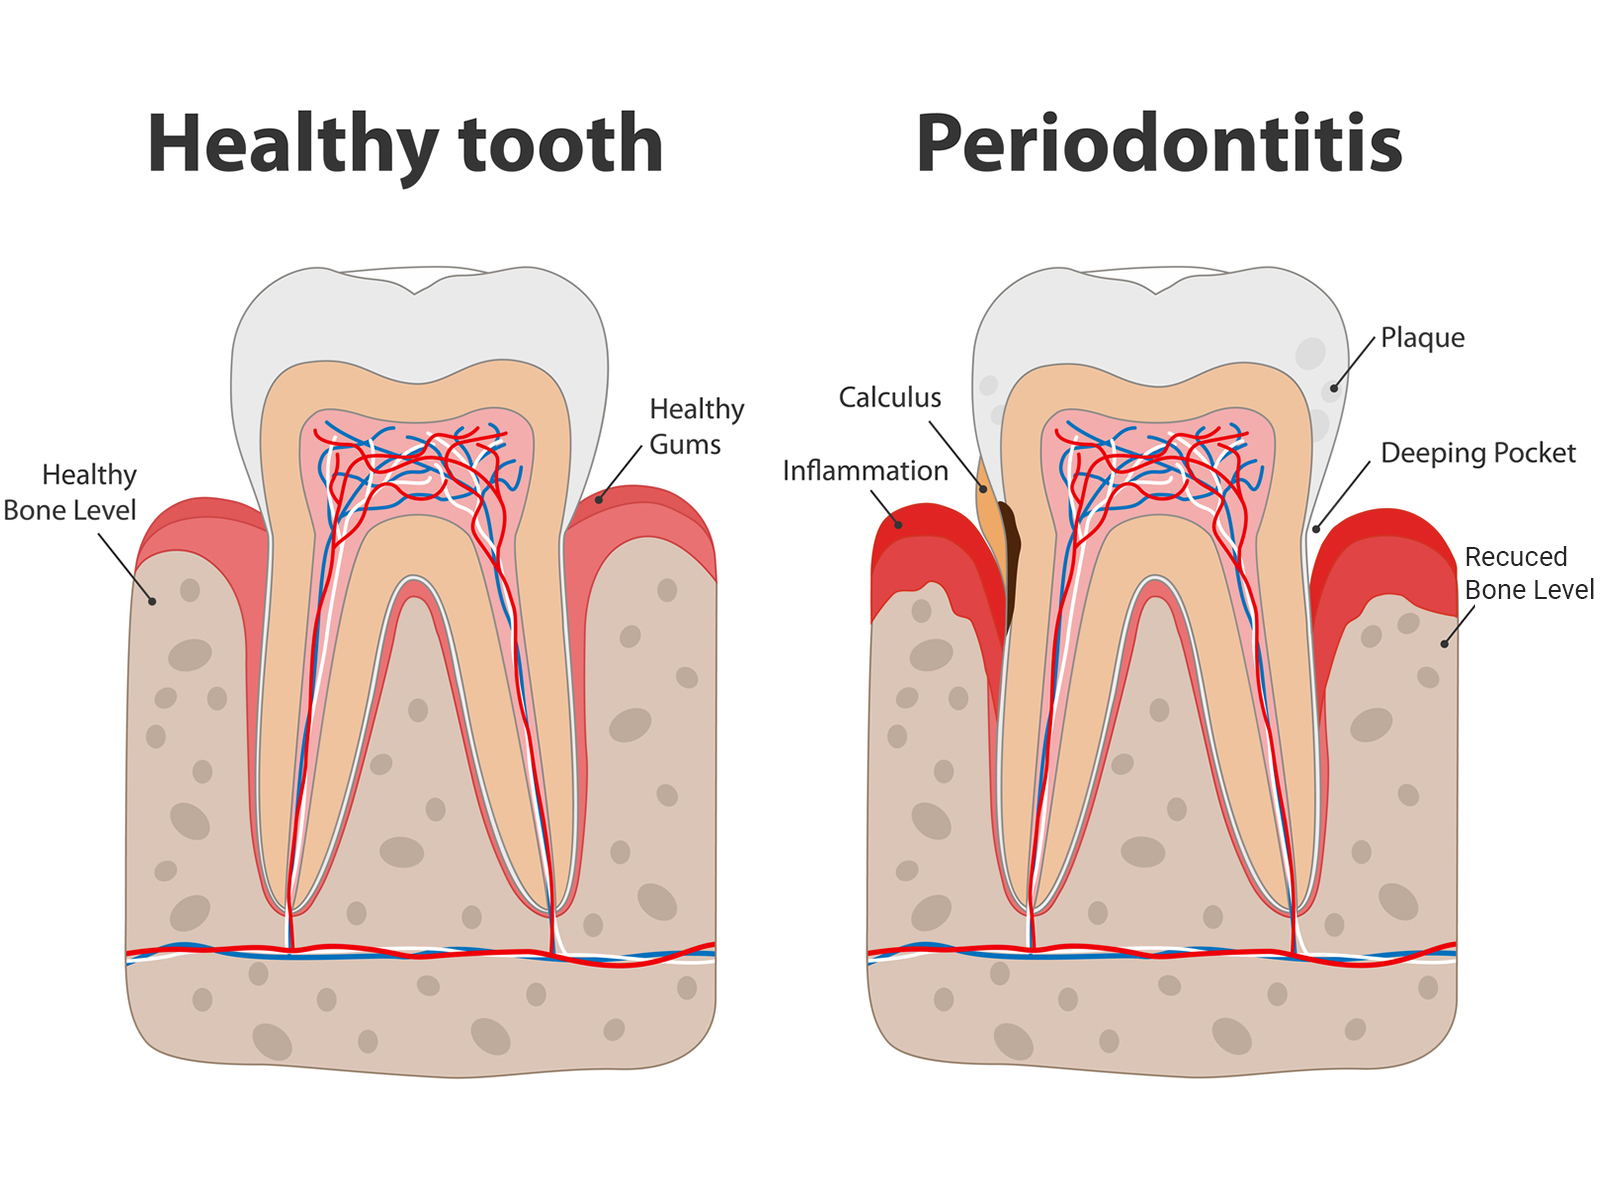 What is a Periodontal Pocket?